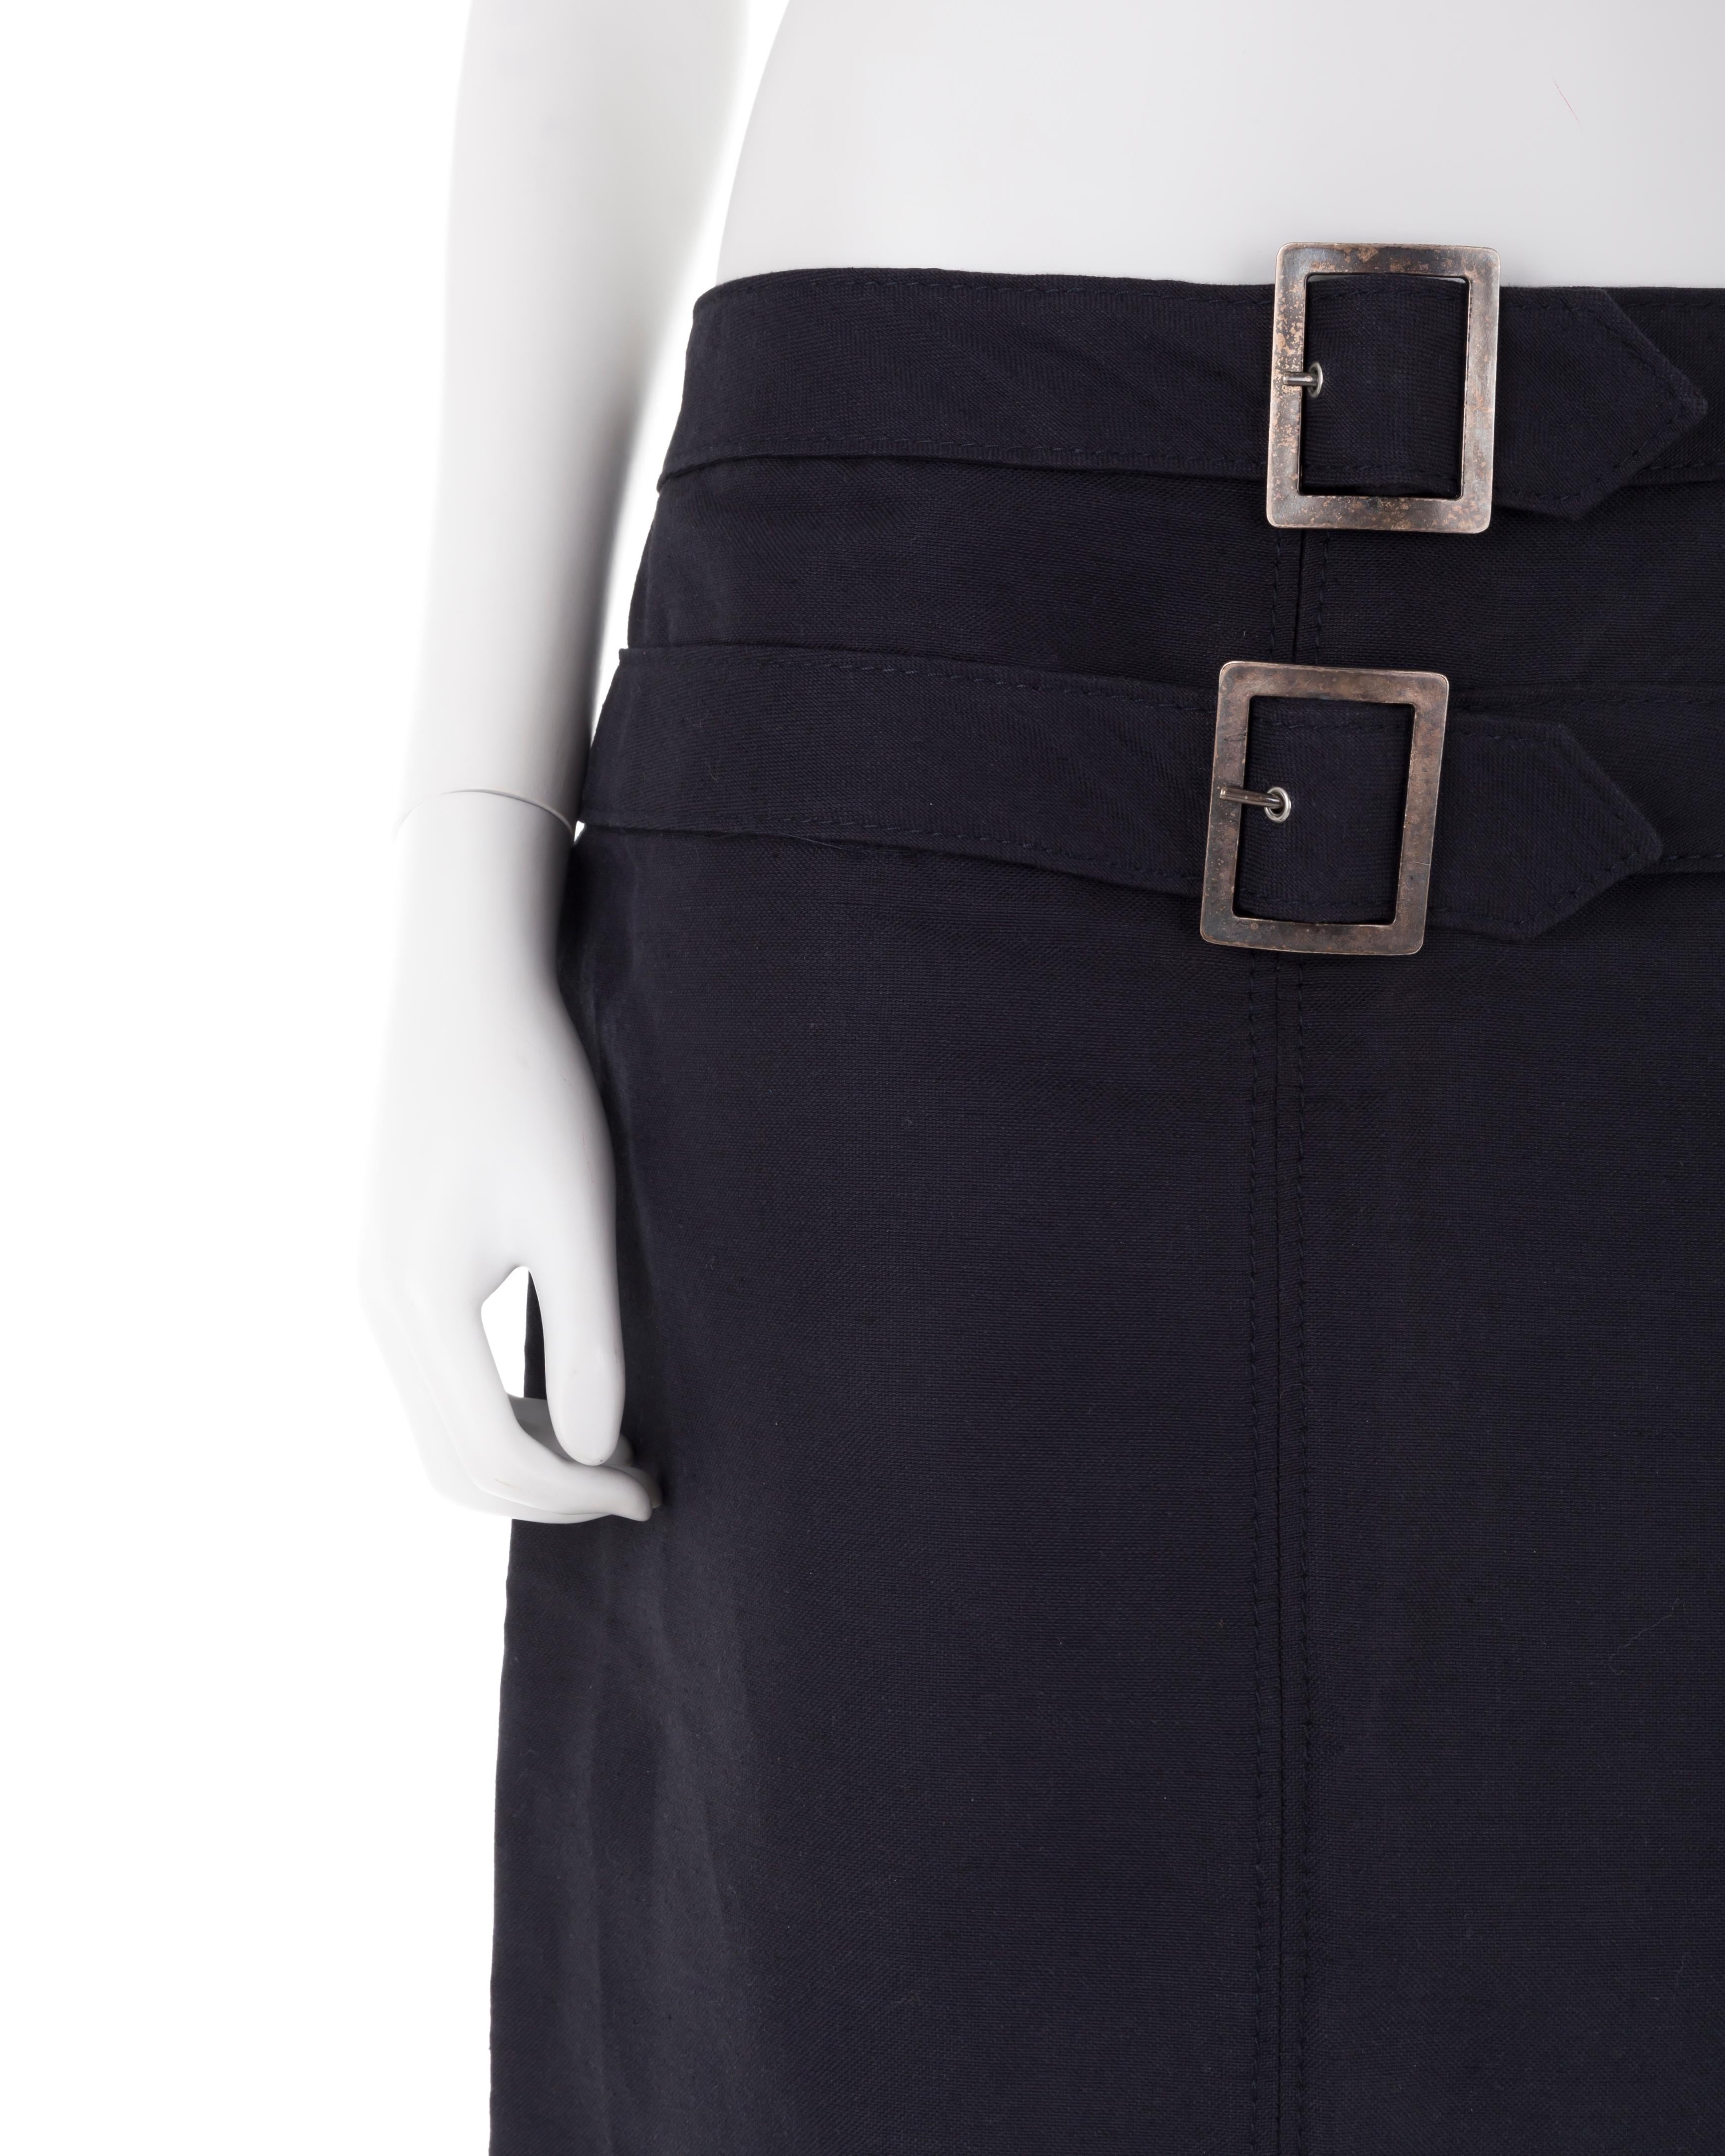 - Navy blue cotton pencil skirt
- Midi length
- Double-belted (metal has tarnished, reflected on price)
- Size UK 8